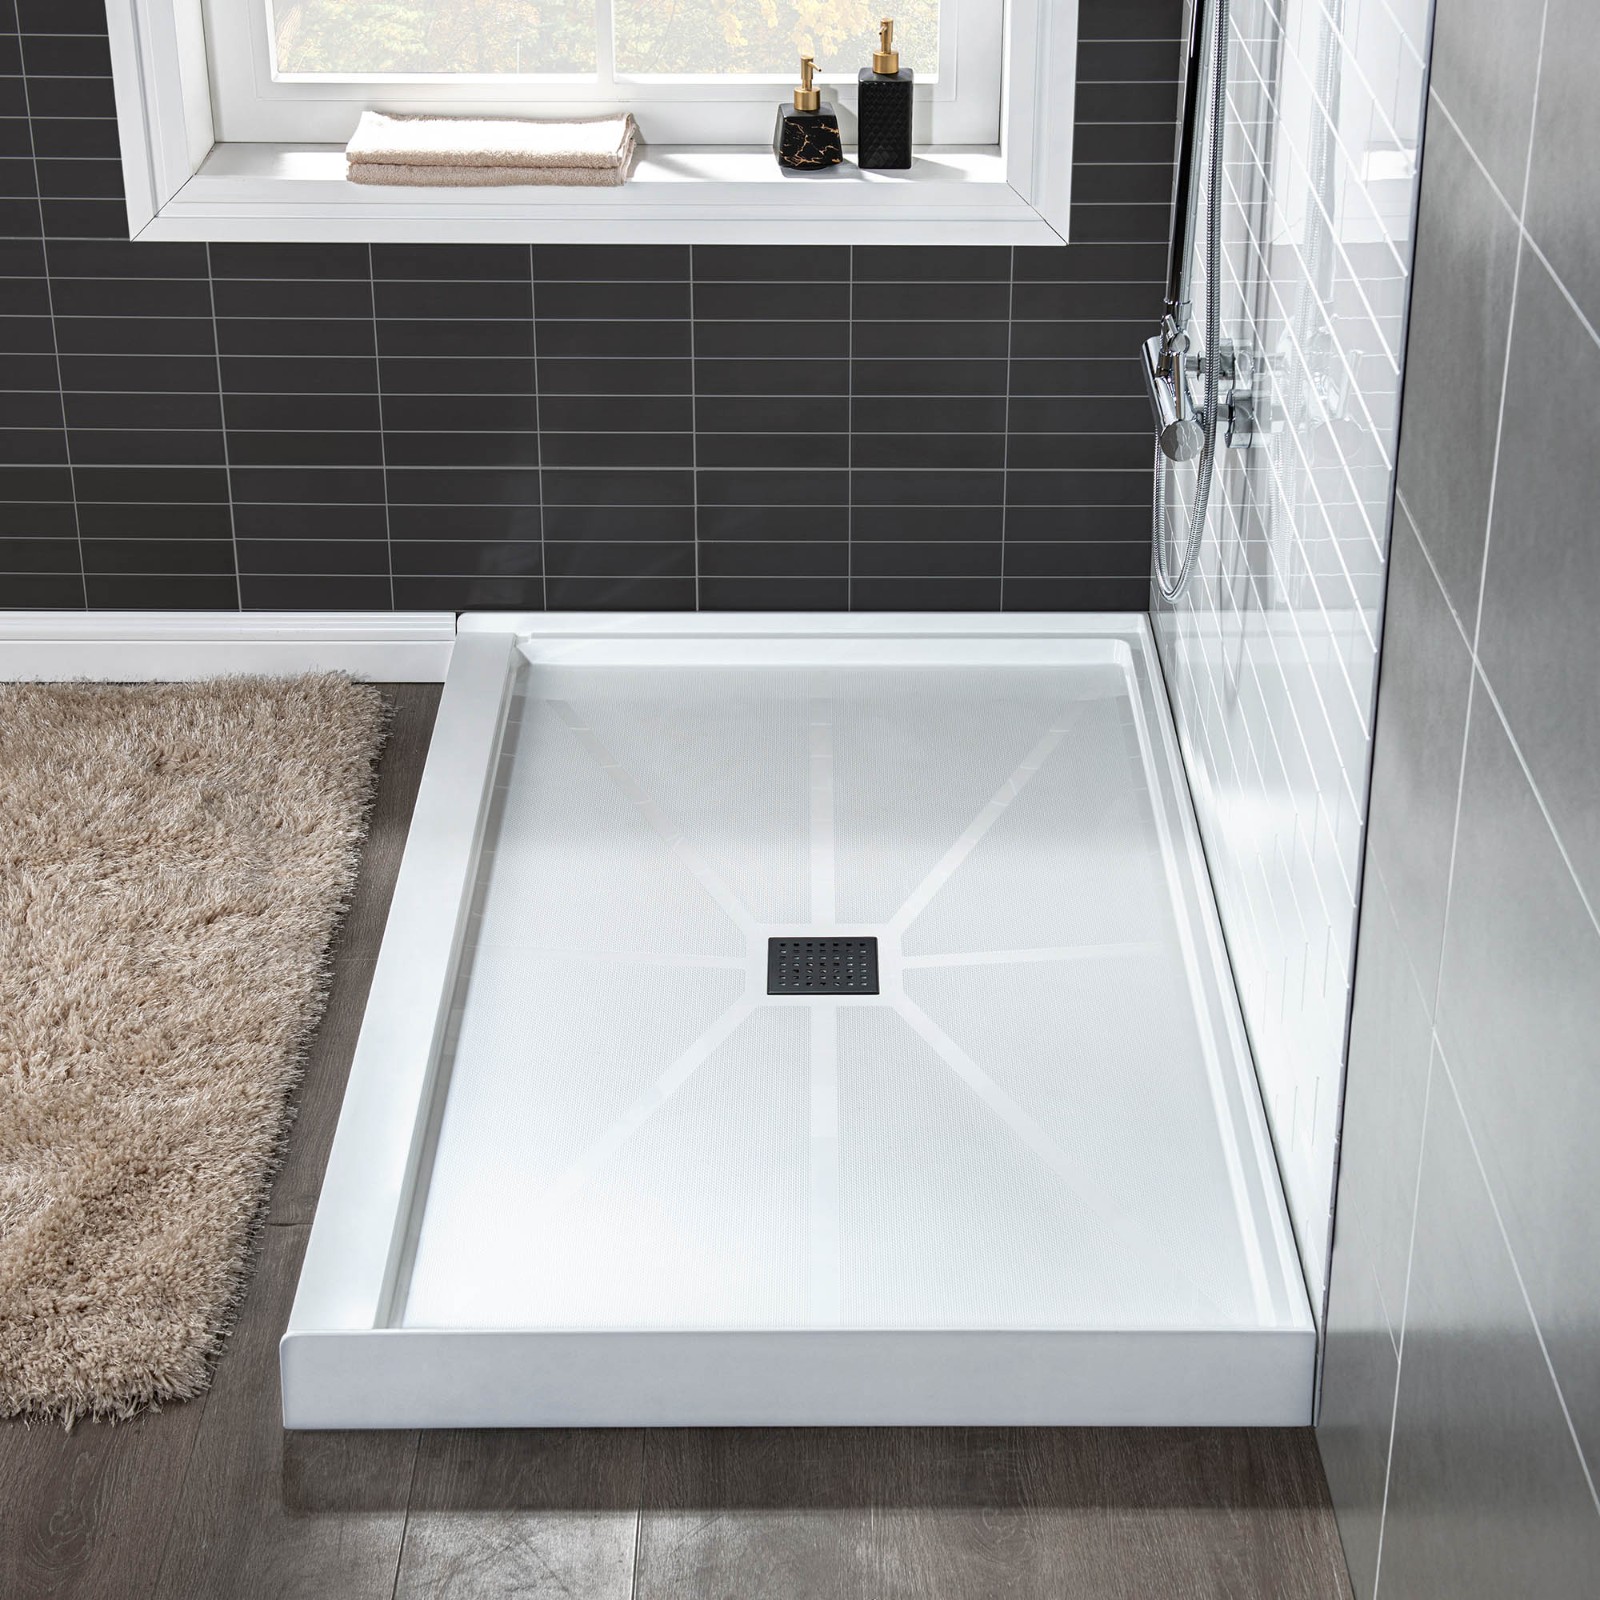  WOODBRIDGE SBR4836-1000C-MB SolidSurface Shower Base with Recessed Trench Side Including Matte Black Linear Cover, 48